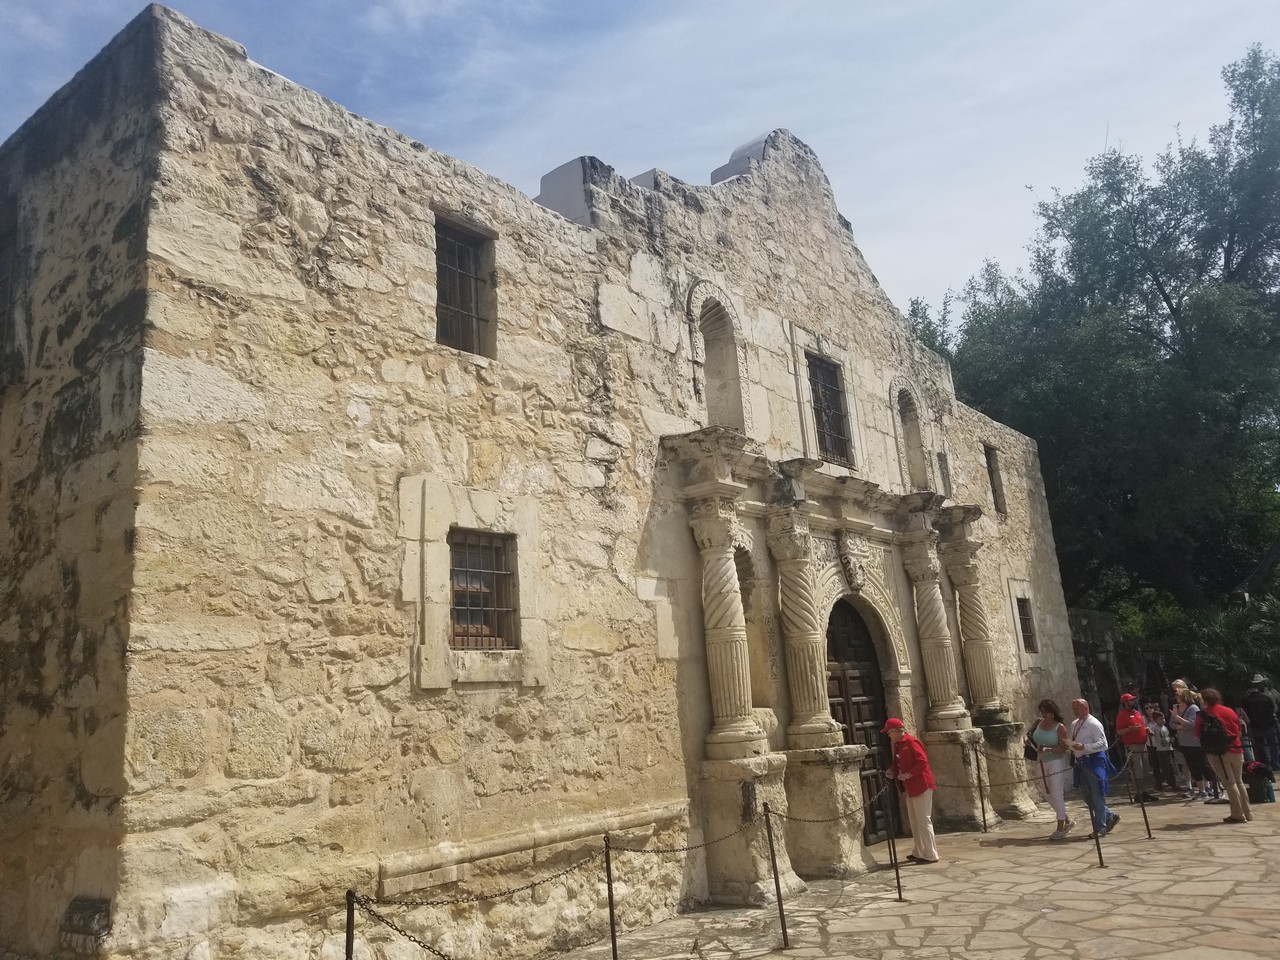 people walking around a stone building with Alamo Mission in San Antonio in the background